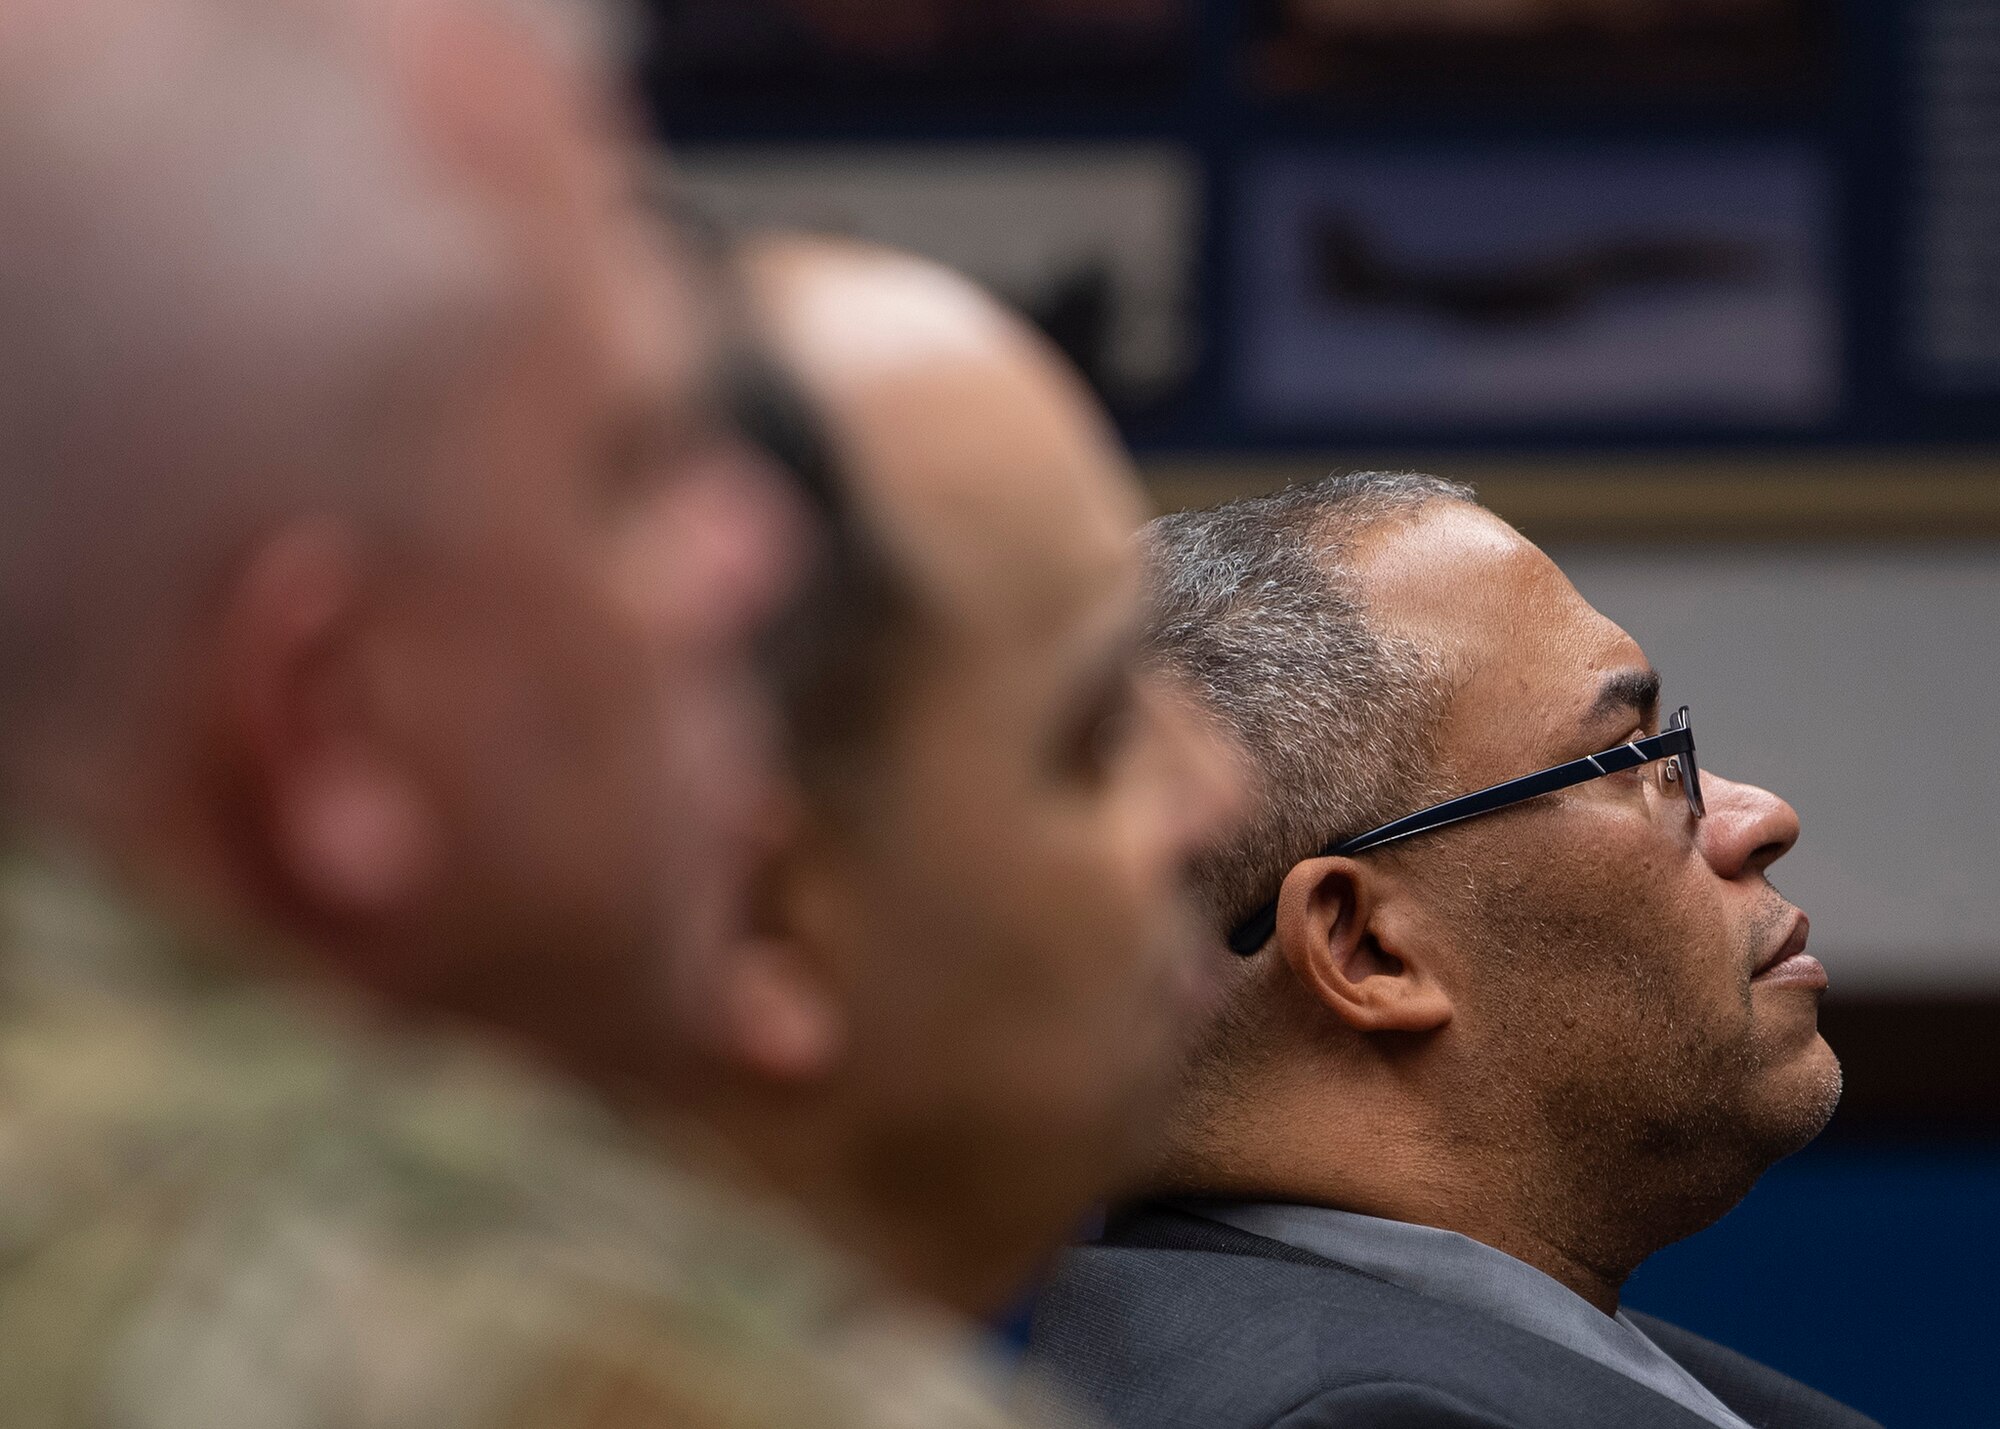 Lt. Col. (Ret.) Jeffrey Fason, Air Force Nuclear Weapon Center program manager, listens during the Dr. Martin Luther King Jr. Observance ceremony at Kirtland Air Force Base, N.M., Jan.15, 2019. Fason and the MLK committee invited Dr. Jack A. Taylor Jr, to be the guest speaker. (U.S. Air Force photo by Staff Sgt. J.D. Strong II)